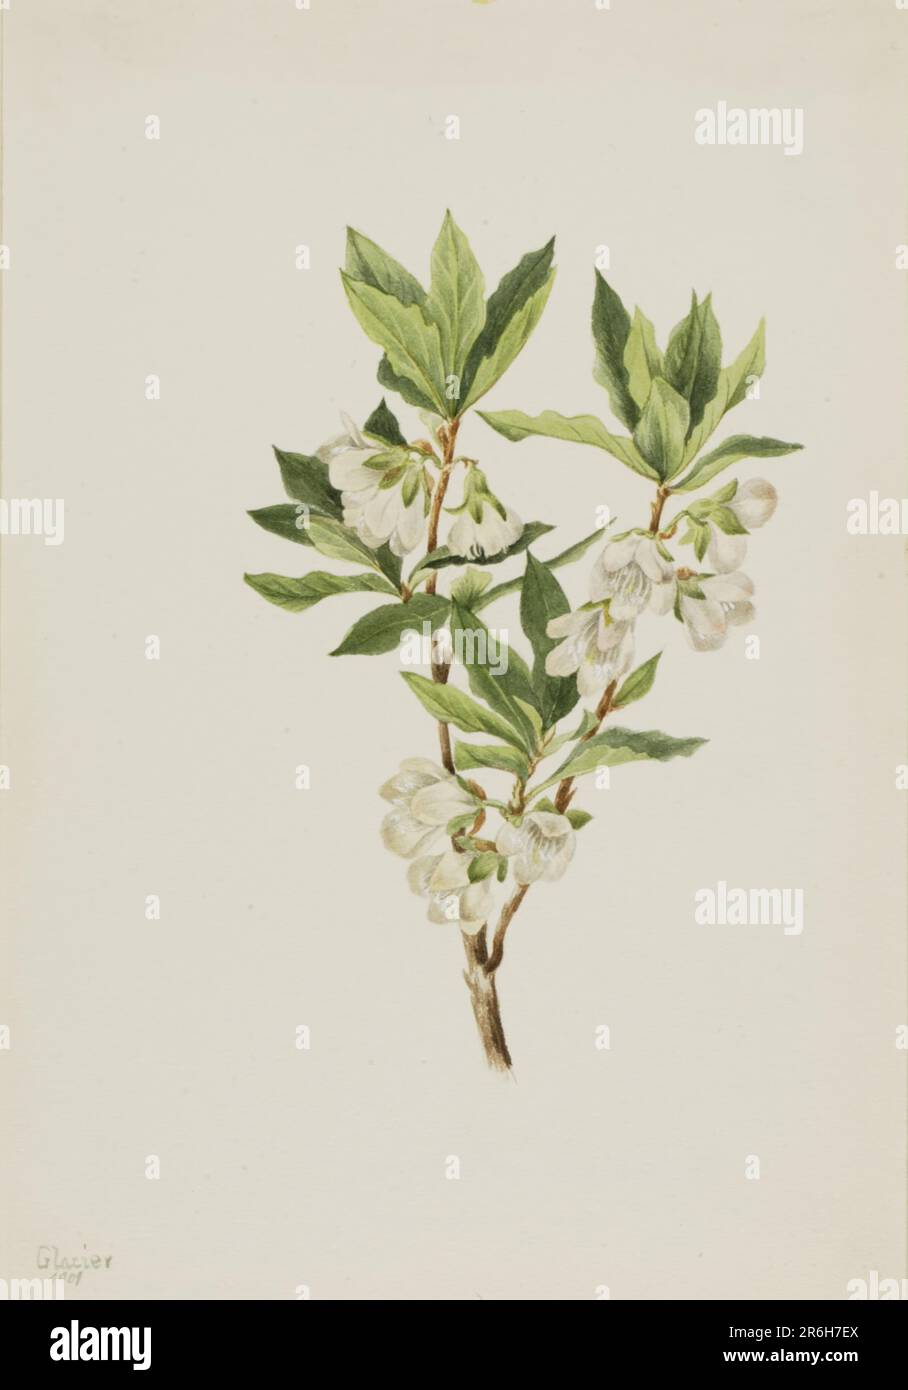 Rocky Mountain Rhododendron (Rhododendron albiflorum). Date: 1901. Watercolor on paper. Museum: Smithsonian American Art Museum. Stock Photo